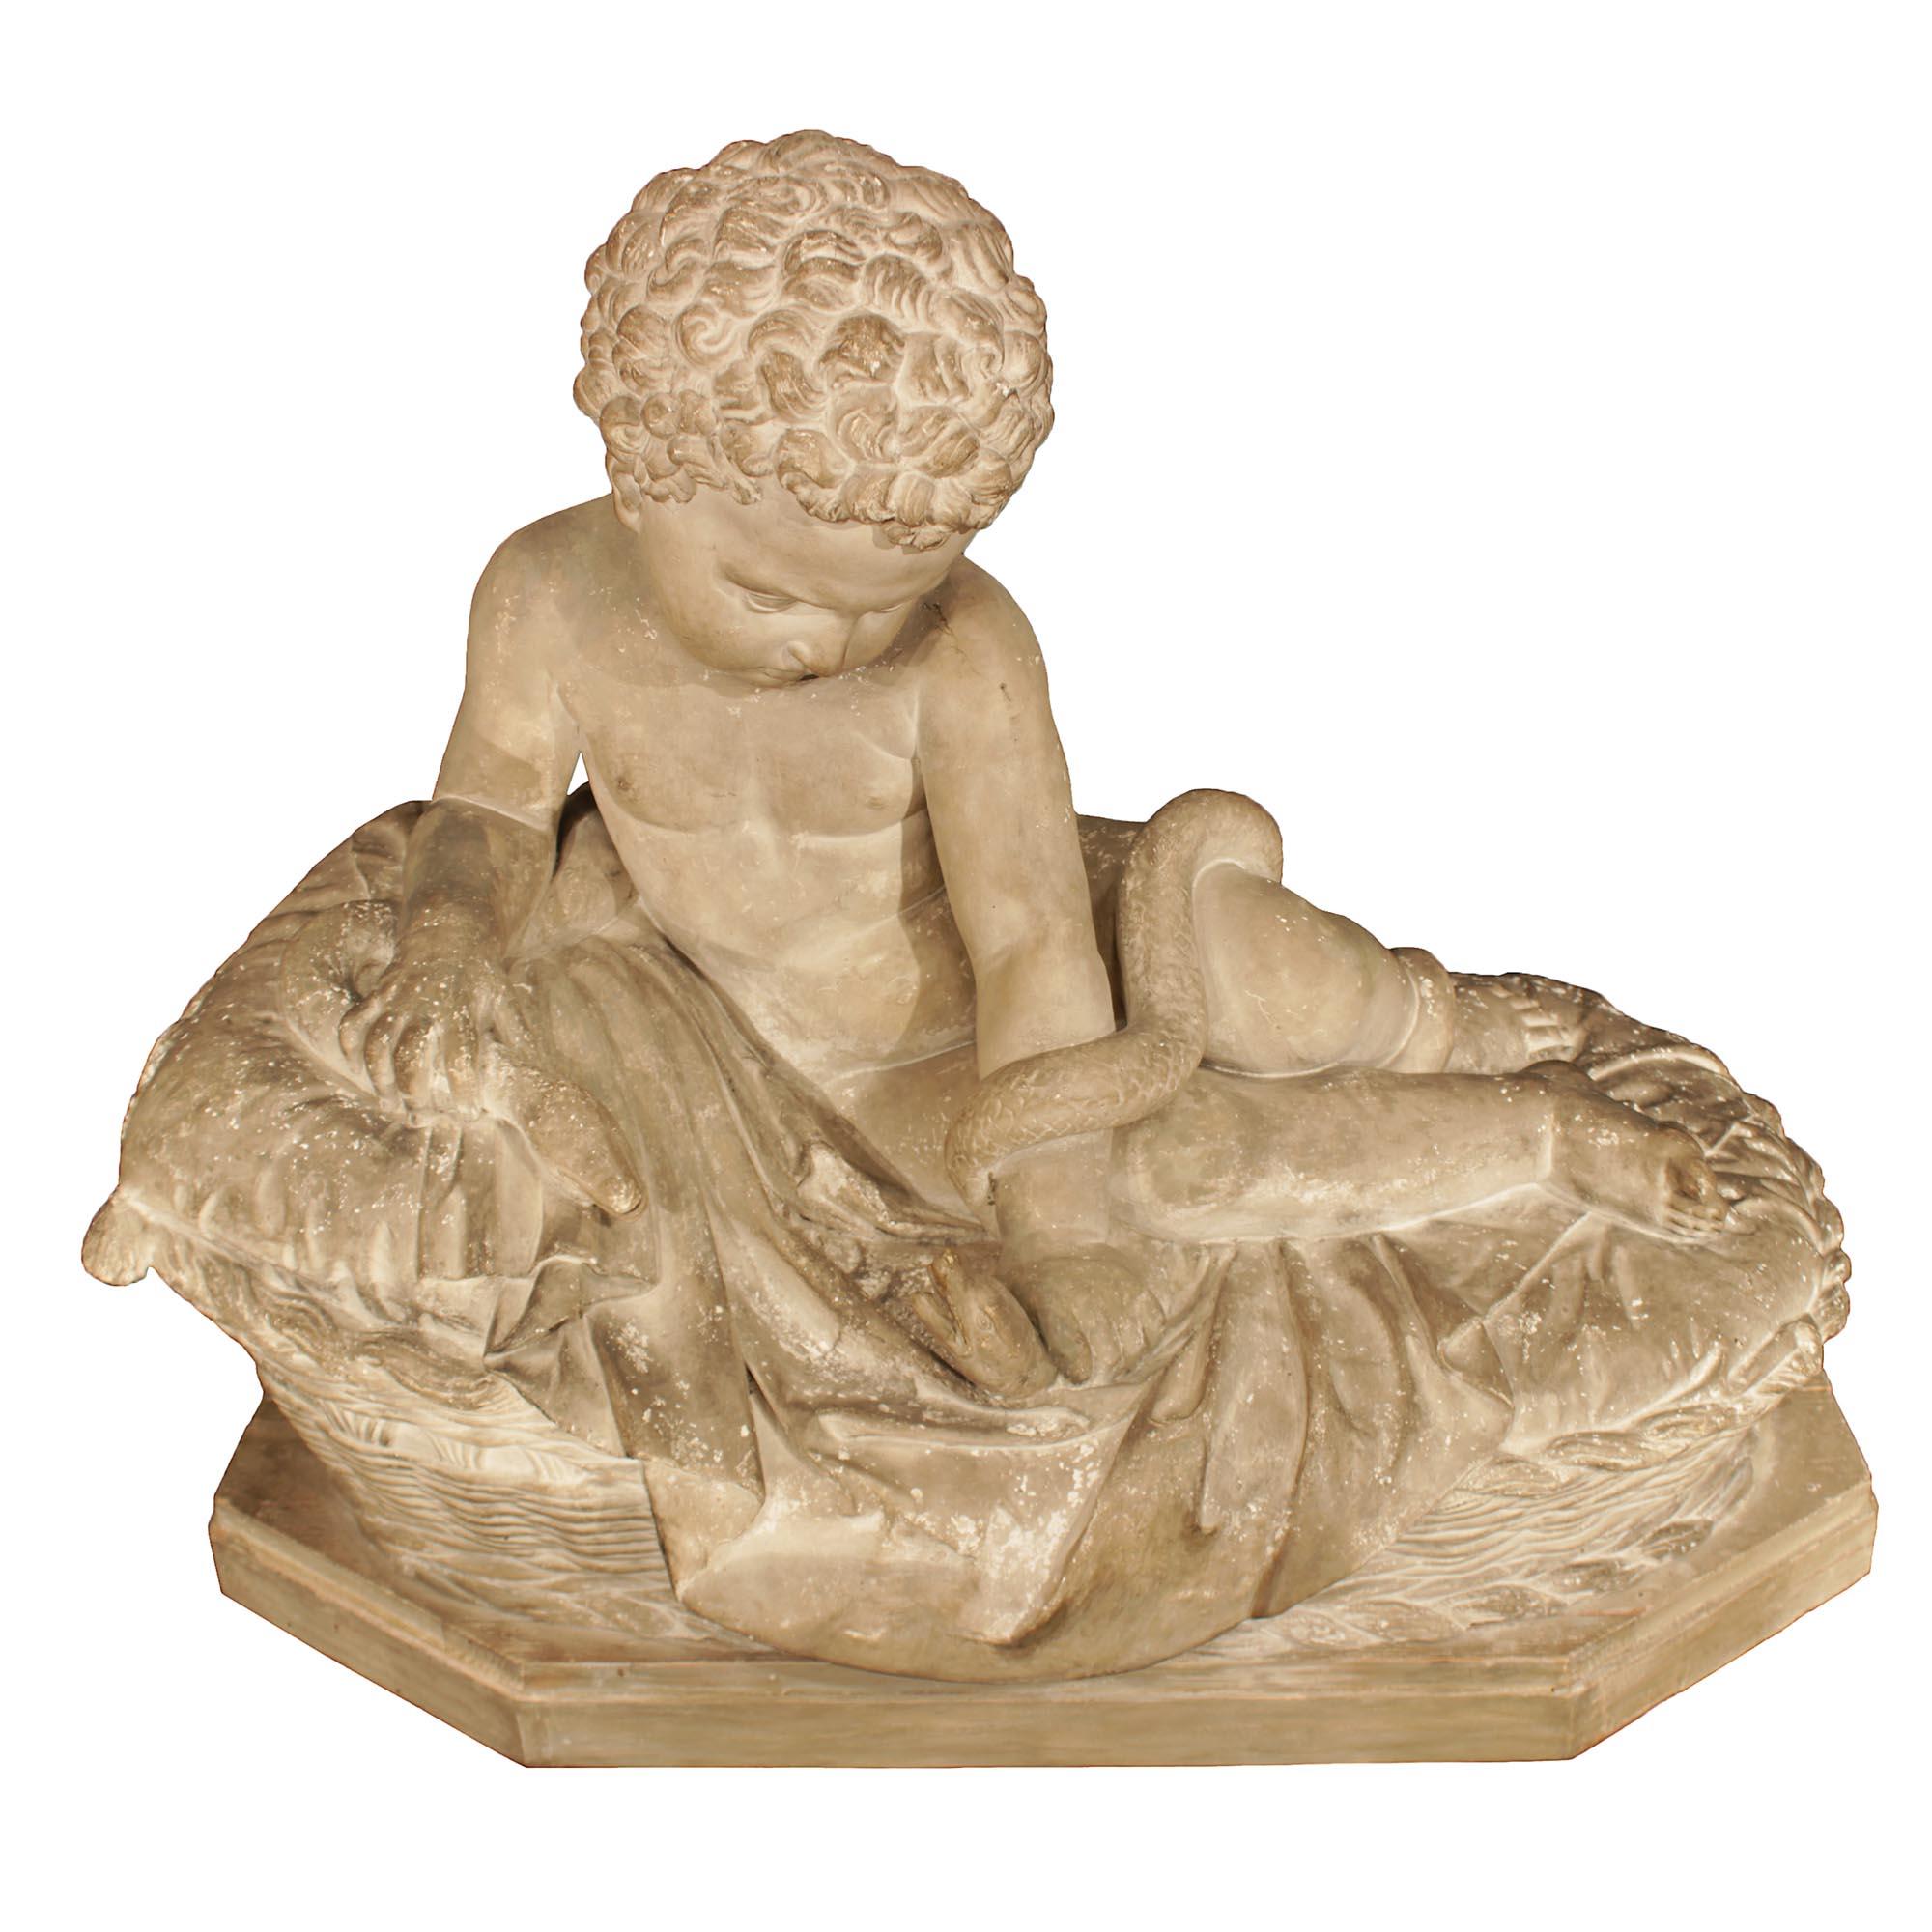 A very decorative Italian 19th century plaster statue of young baby Hercules. The statue is raised on an elongated hexagonal patinated base. Above is a wicker designed bed with large pillow and bedding. A small cherub resting in bed is focused on